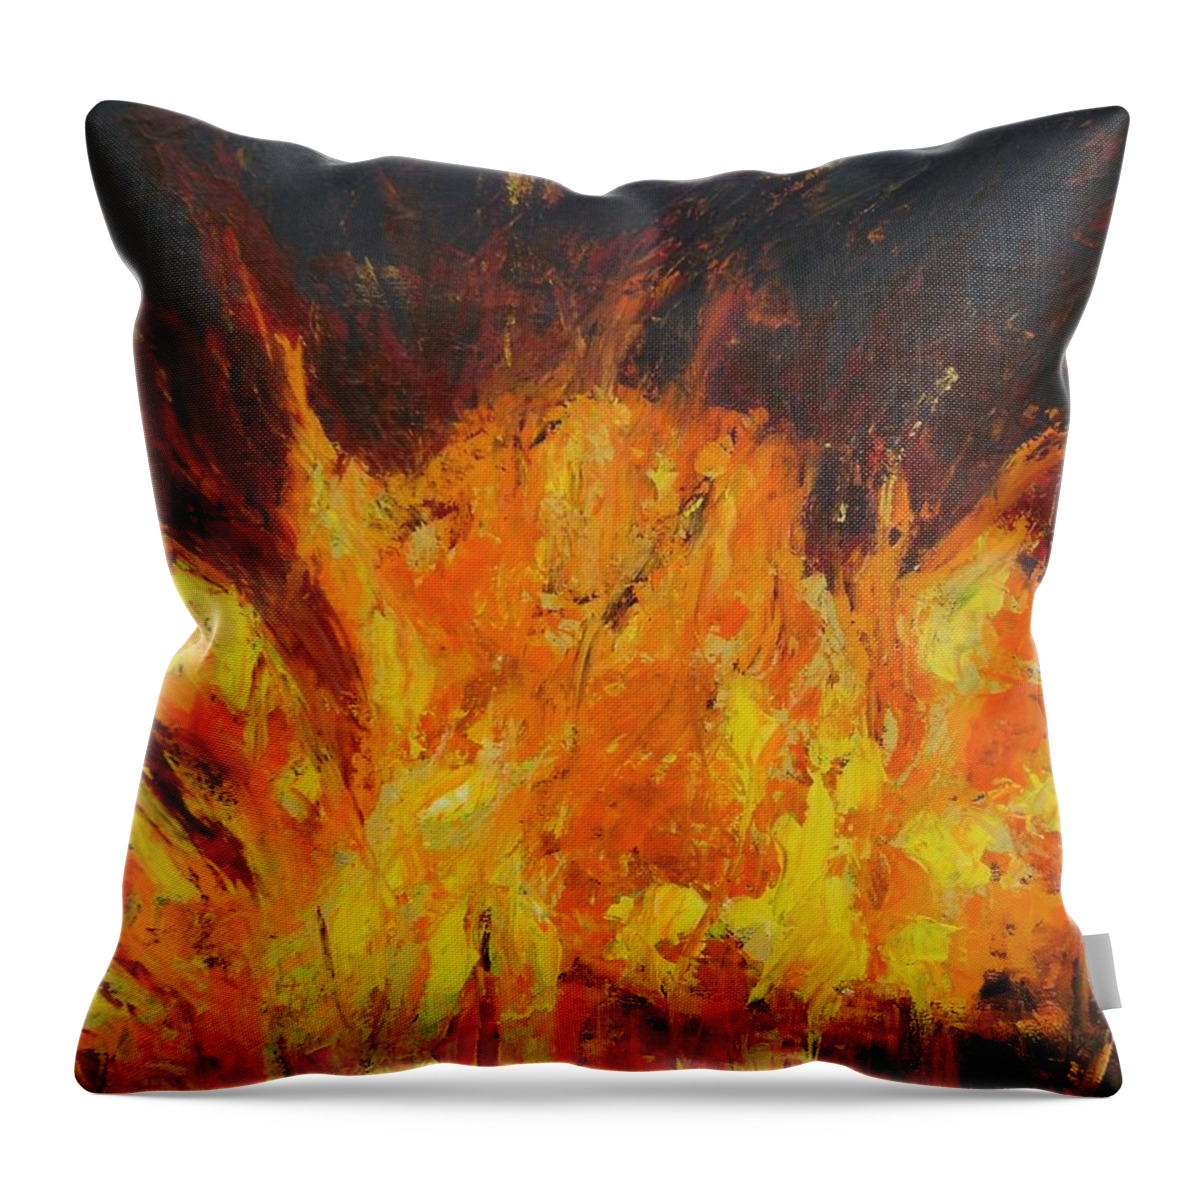 Transformation Through Fire I Throw Pillow featuring the painting Transformation through fire I by Therese Legere